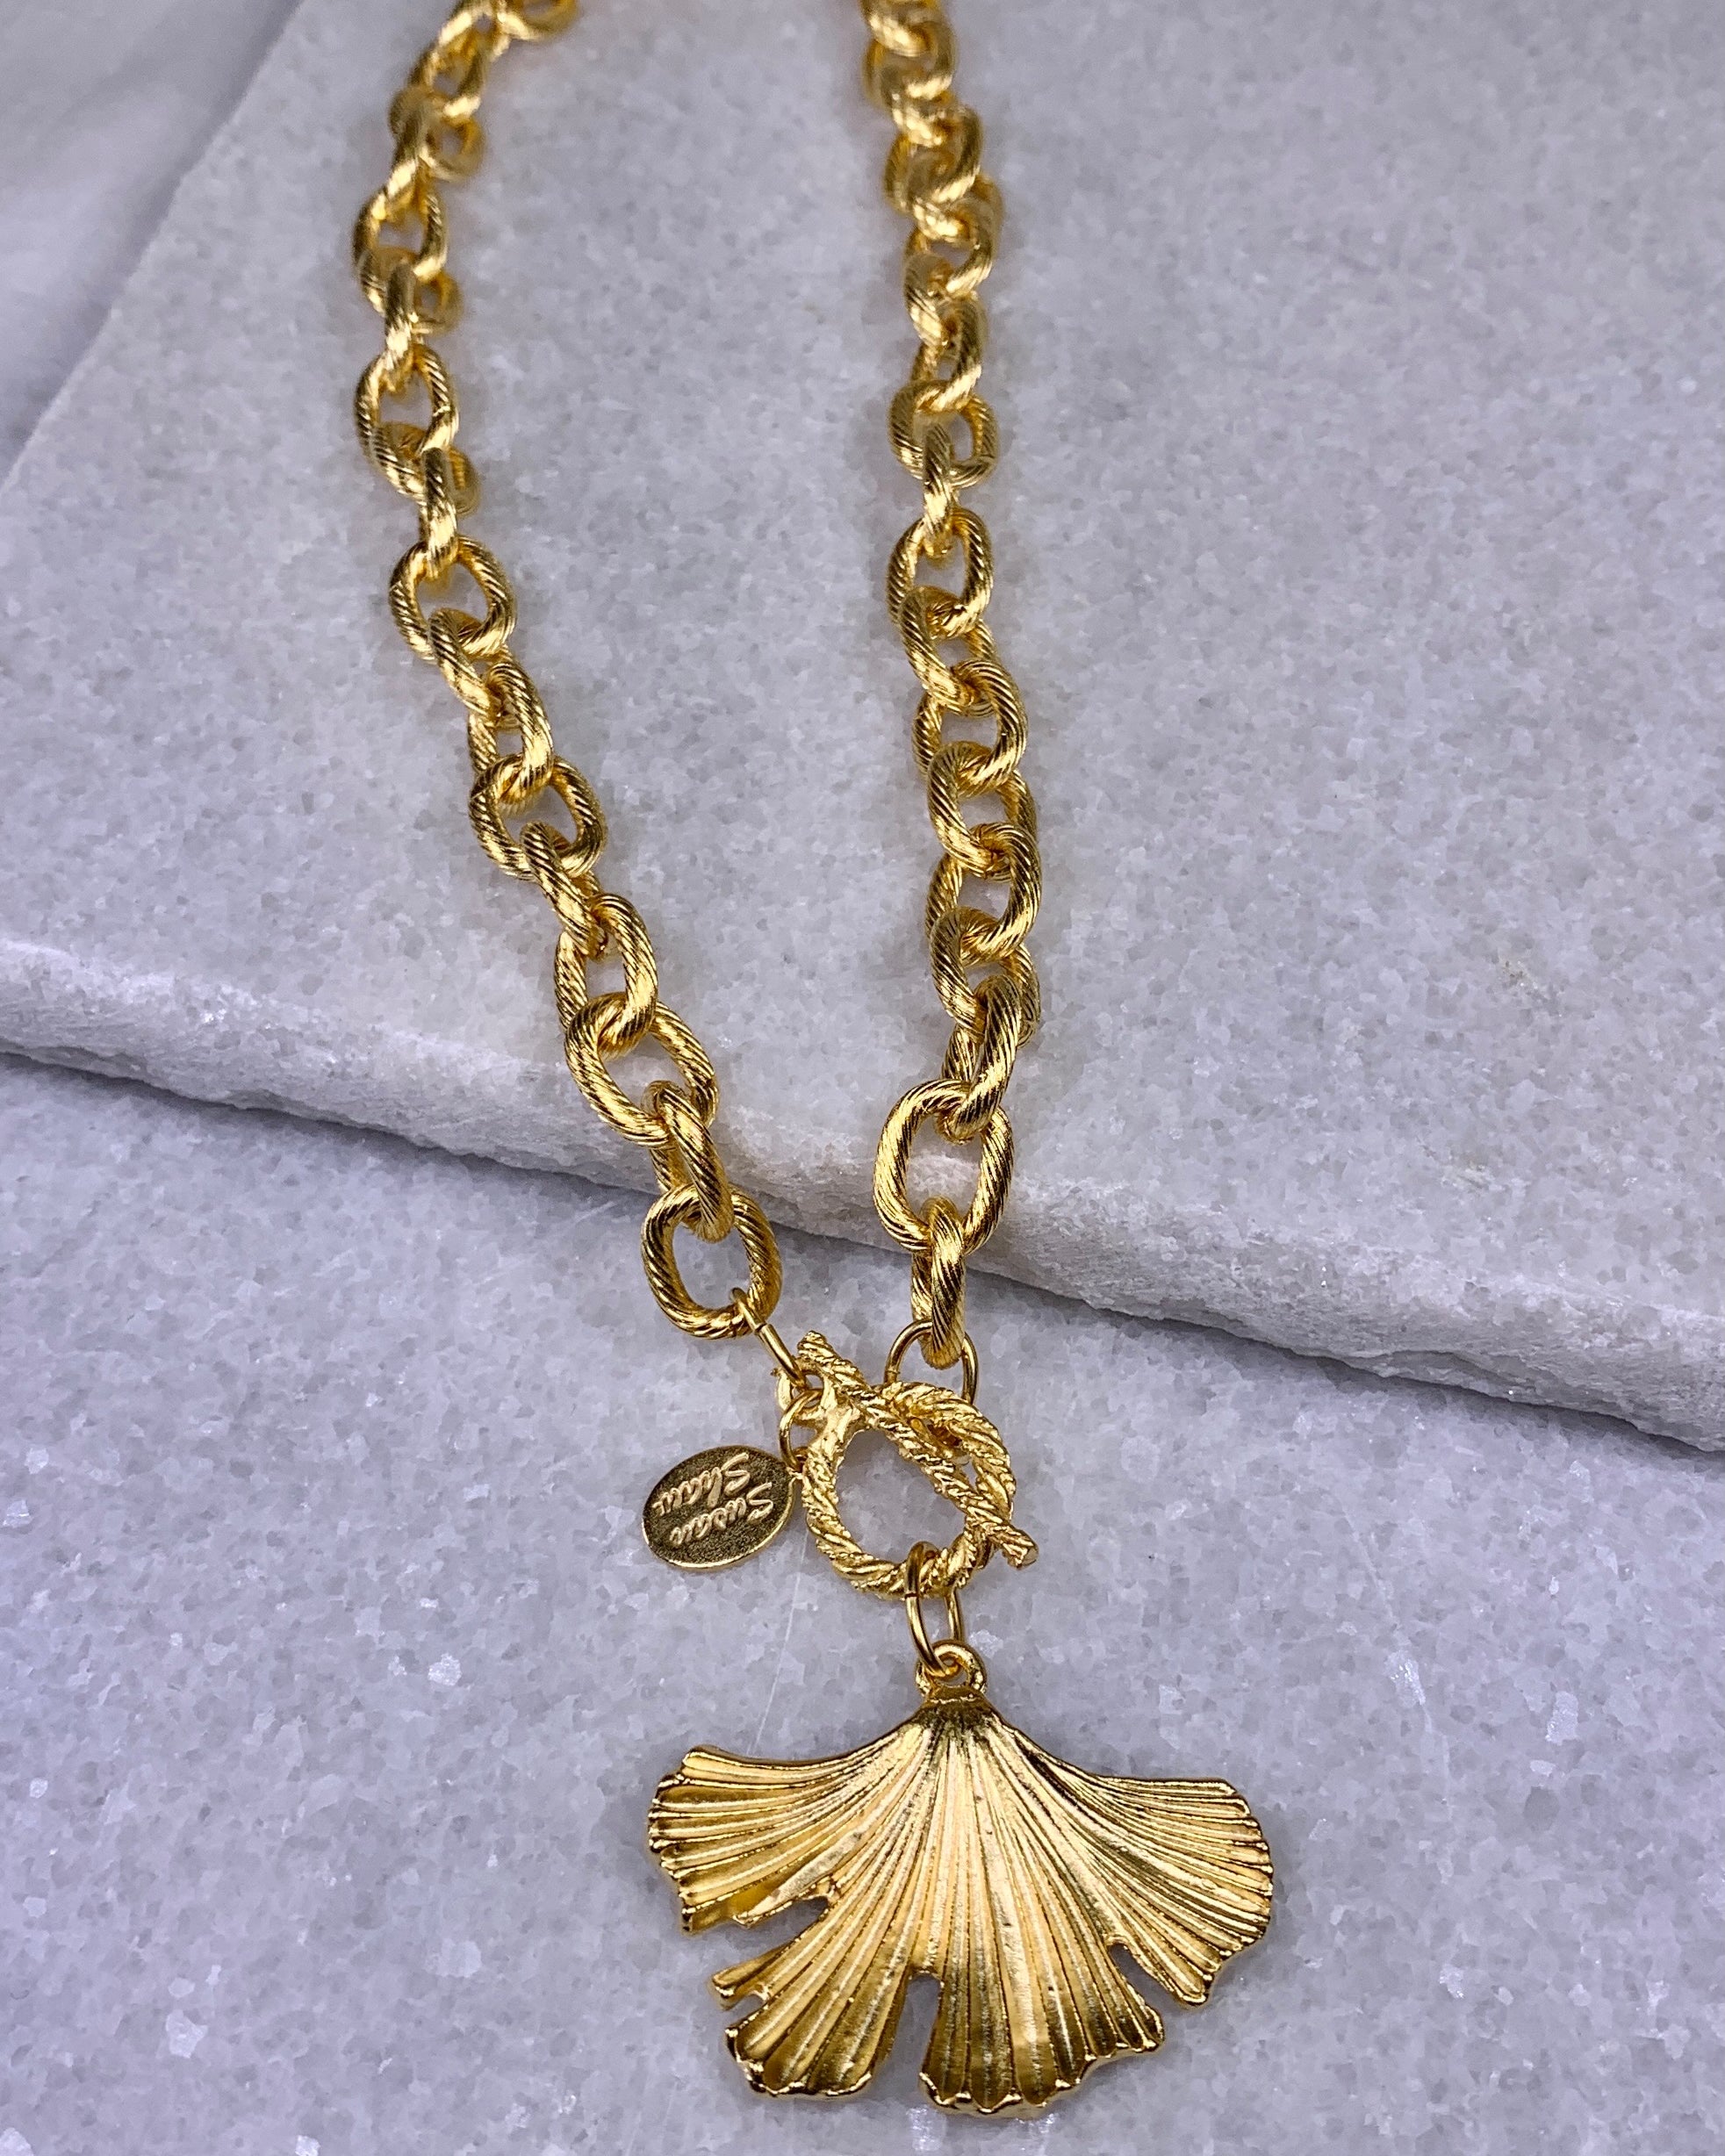 Susan Shaw Ginkgo Toggle Necklace.